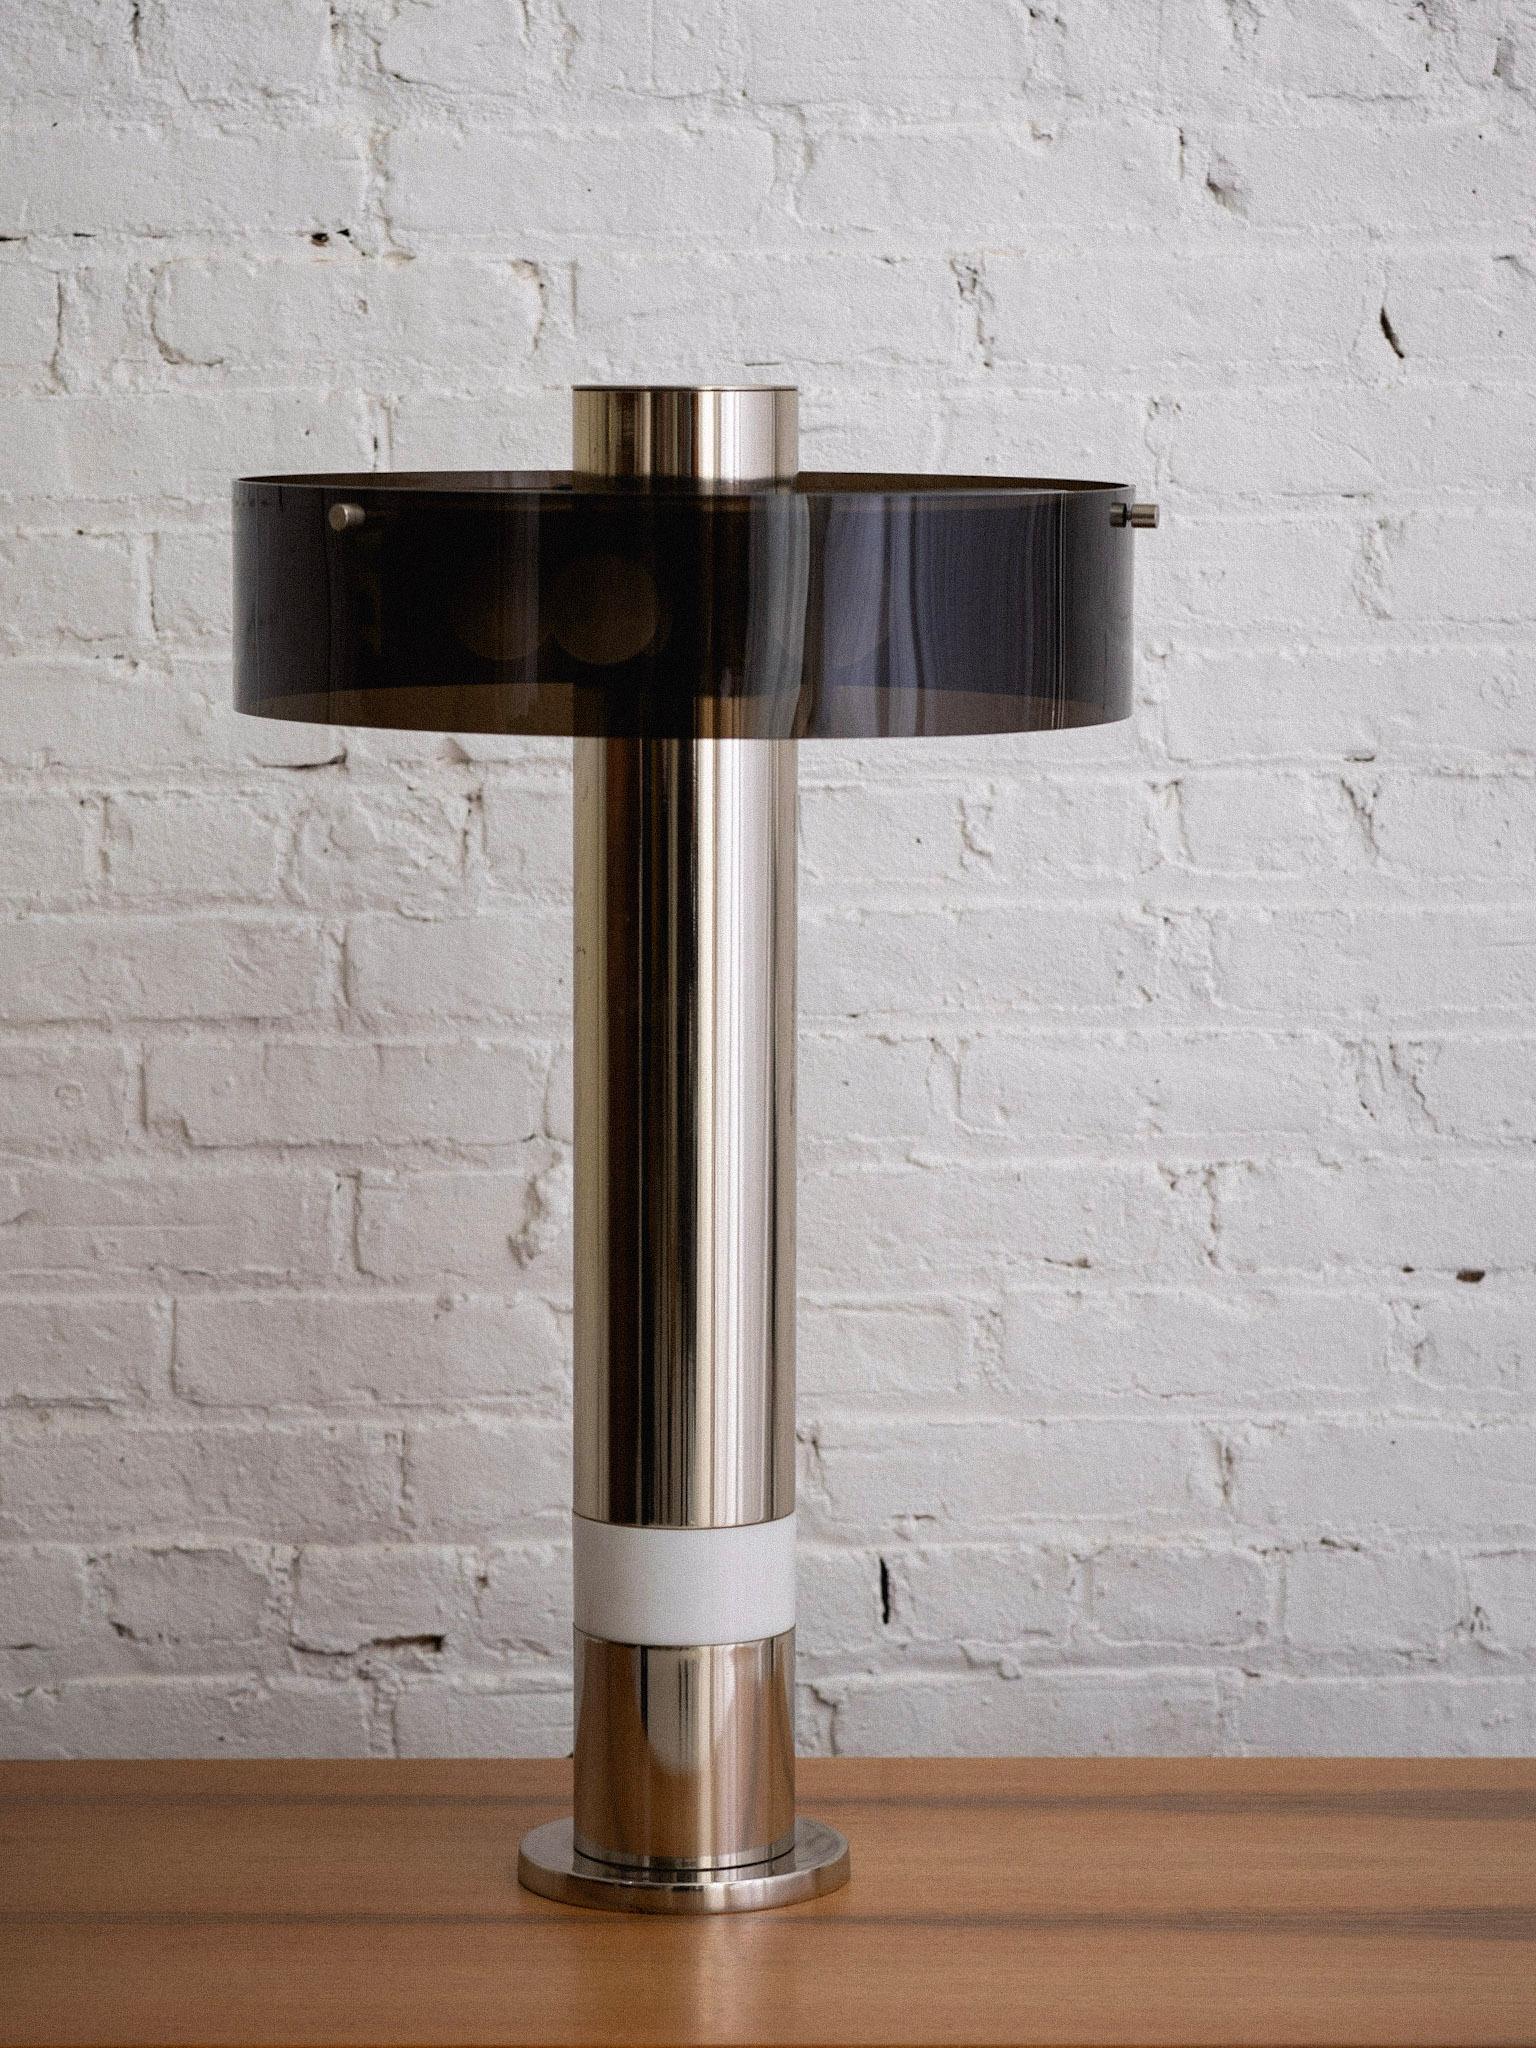 A midcentury chrome and acrylic table lamp. Chrome cylinder features a lower internal light and upper six bulb sockets covered with a smoke acrylic shade. Lower light source can be turned on with or without upper lighting.